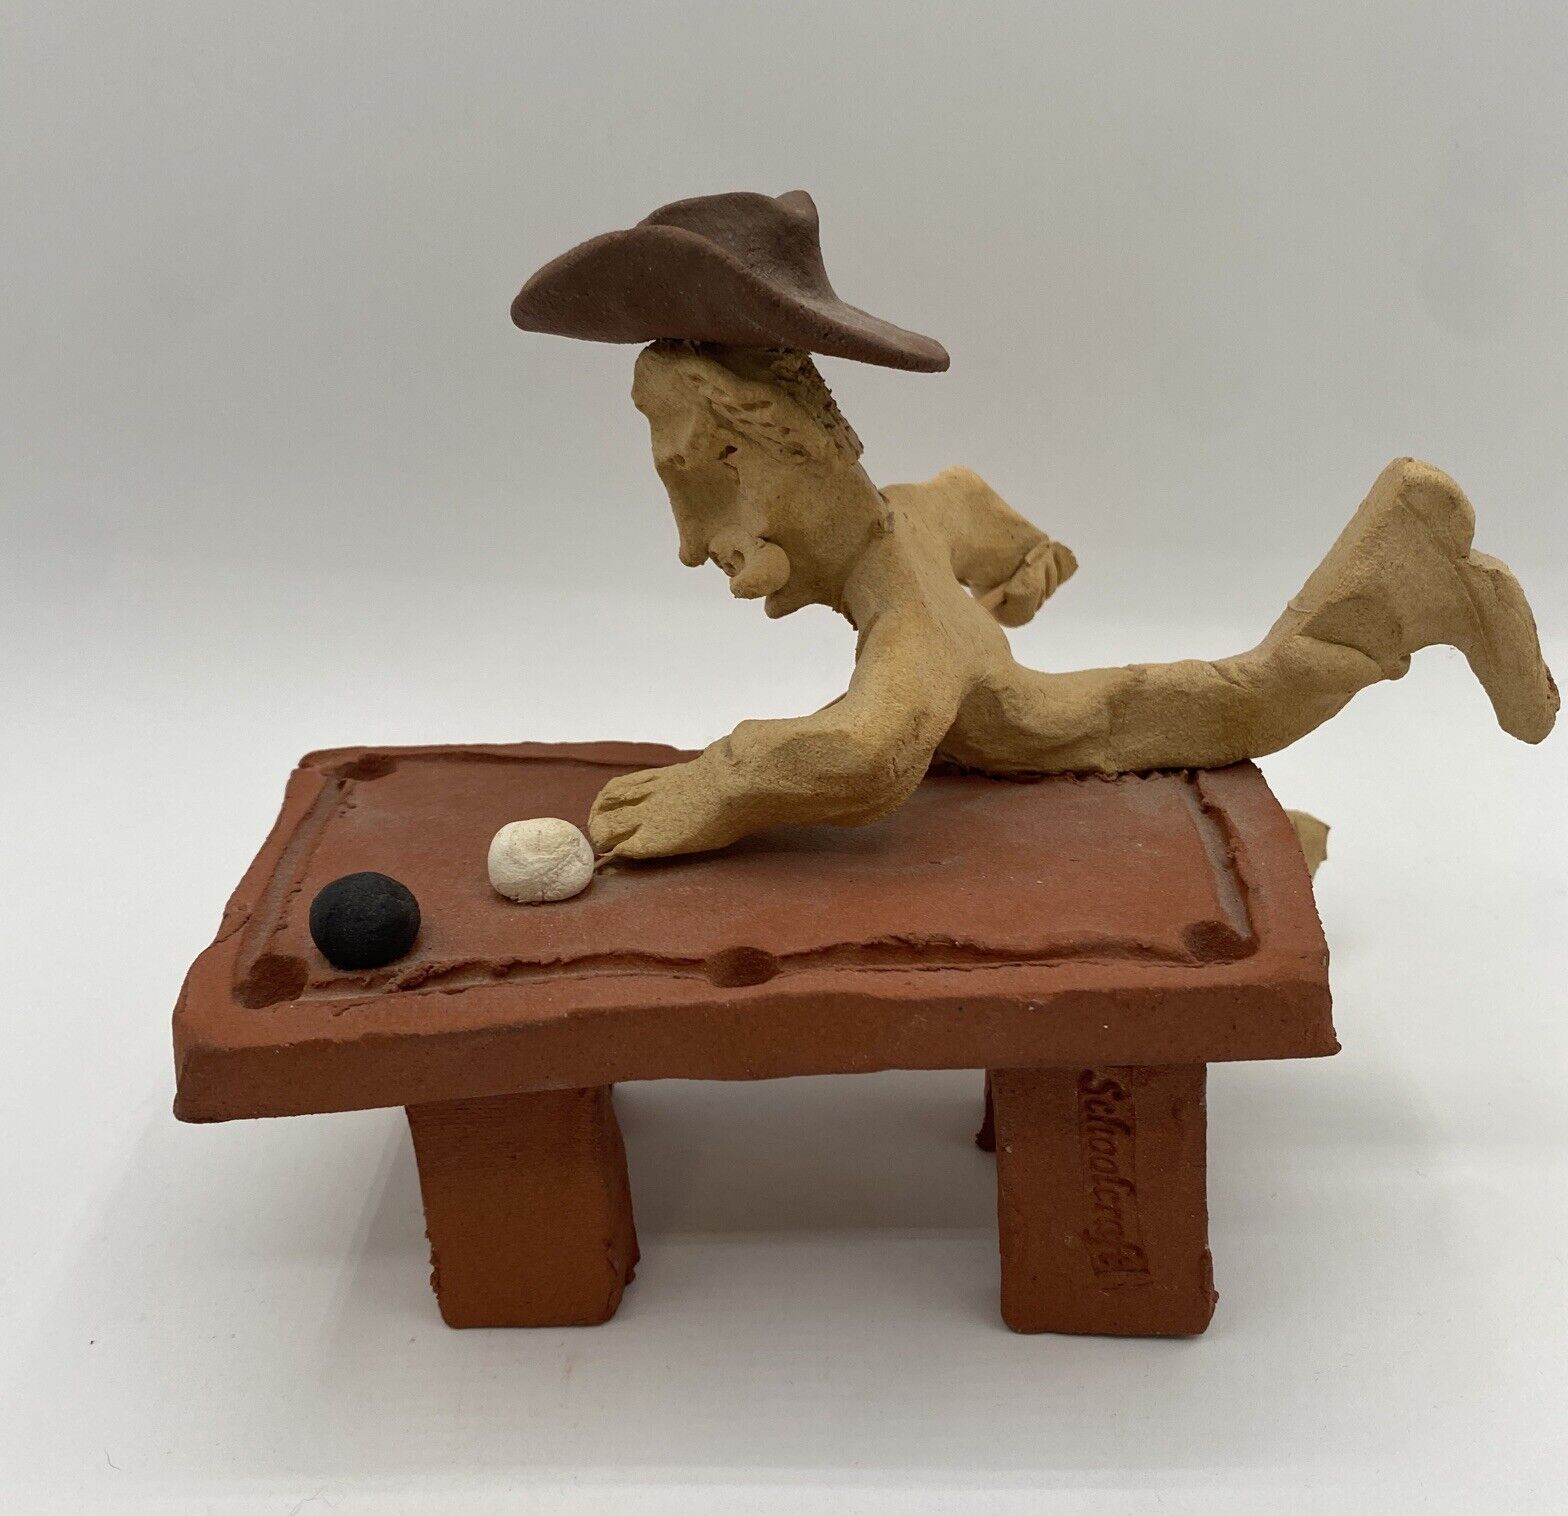 Tom Schoolcraft Cowboy Sculpture Playing Pool Billiards With Table, Cue, & Balls